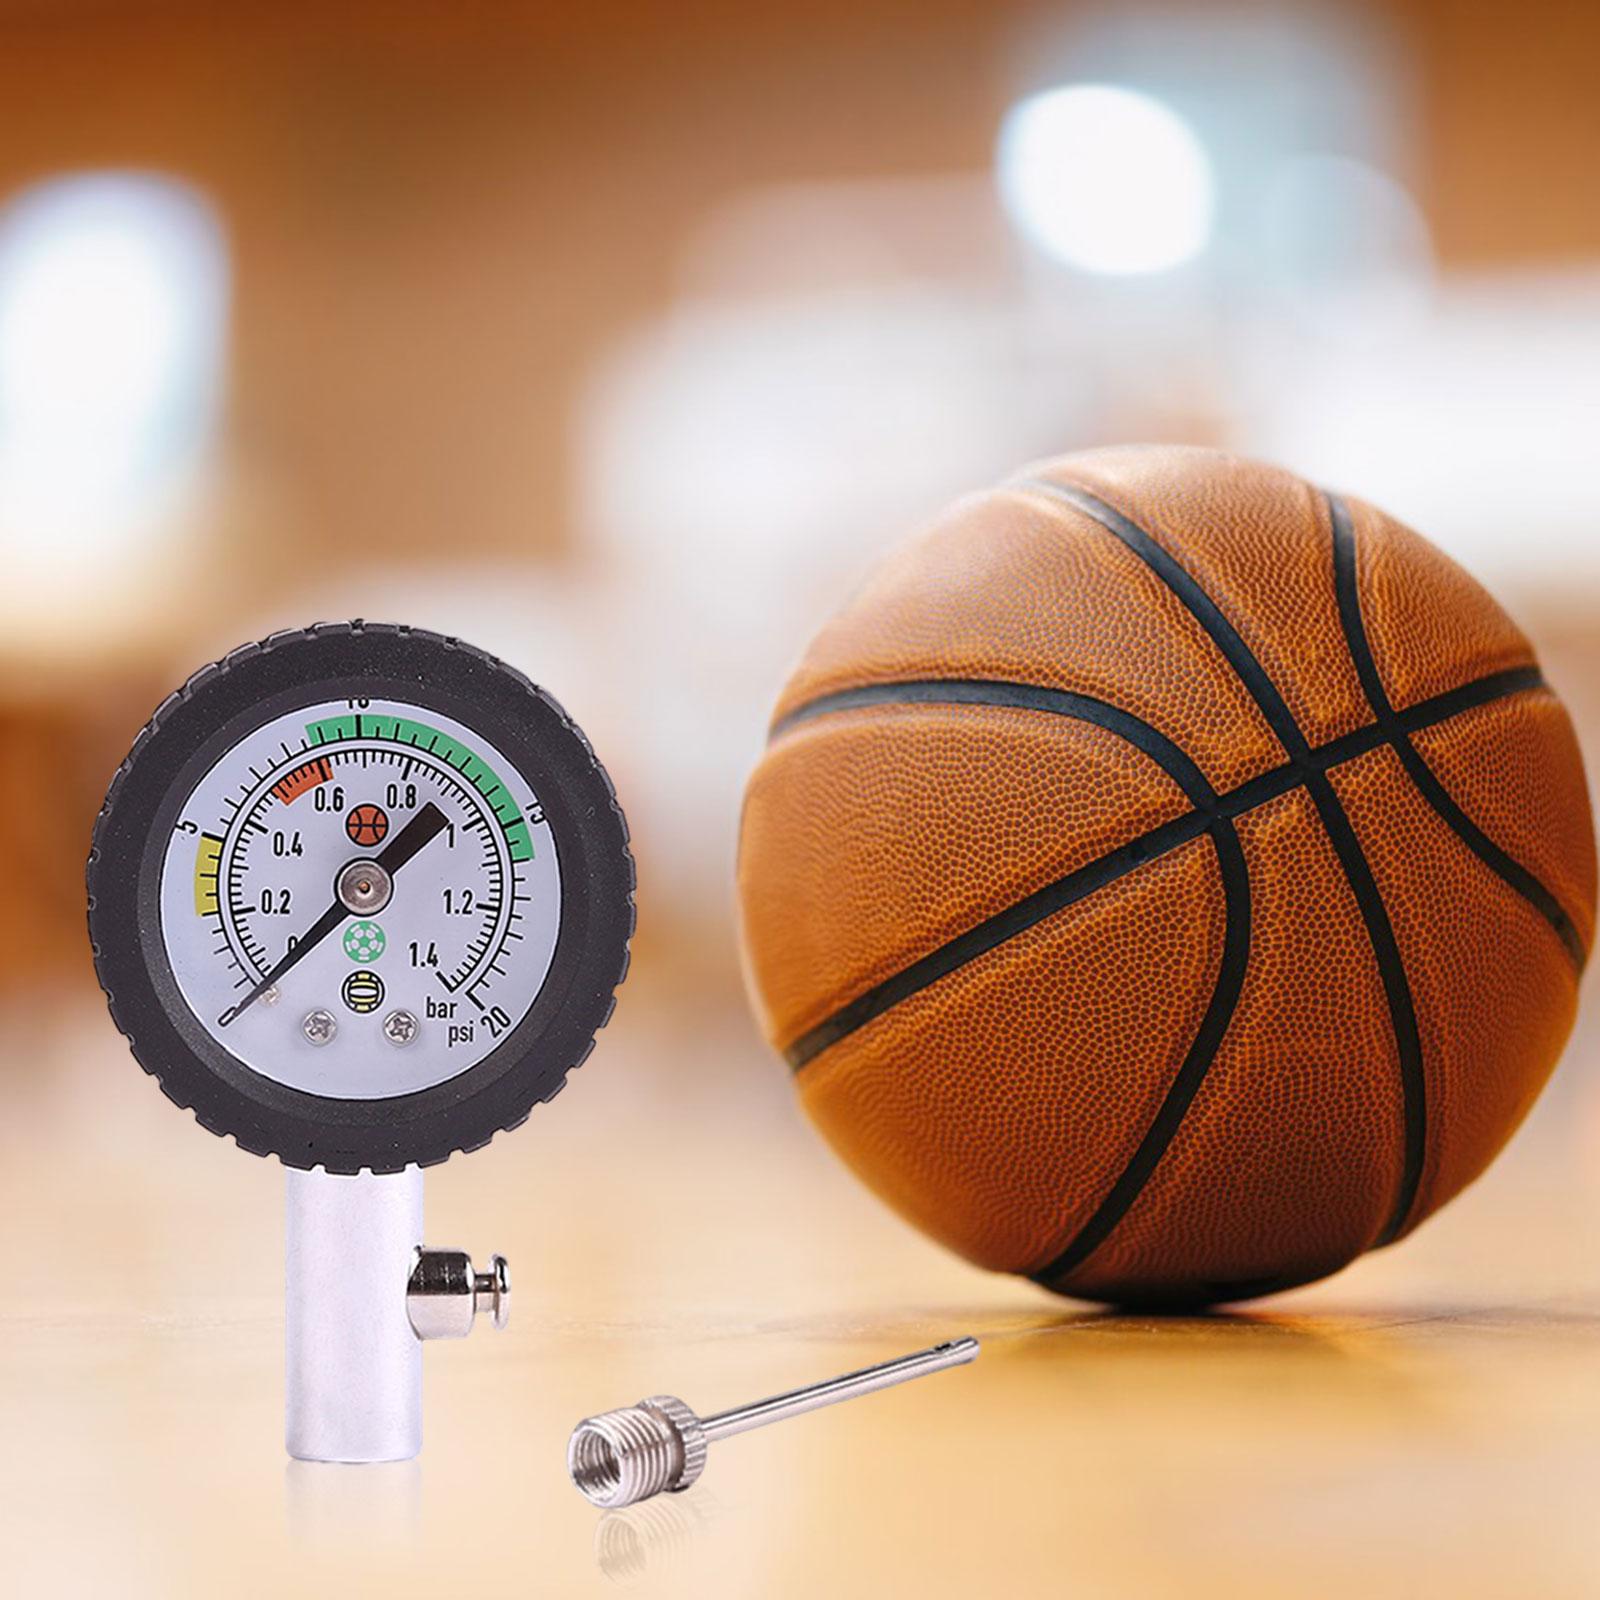 Ball Pressure Gauge Lightweight Mini Measuring for Football Rugby Volleyball with cover